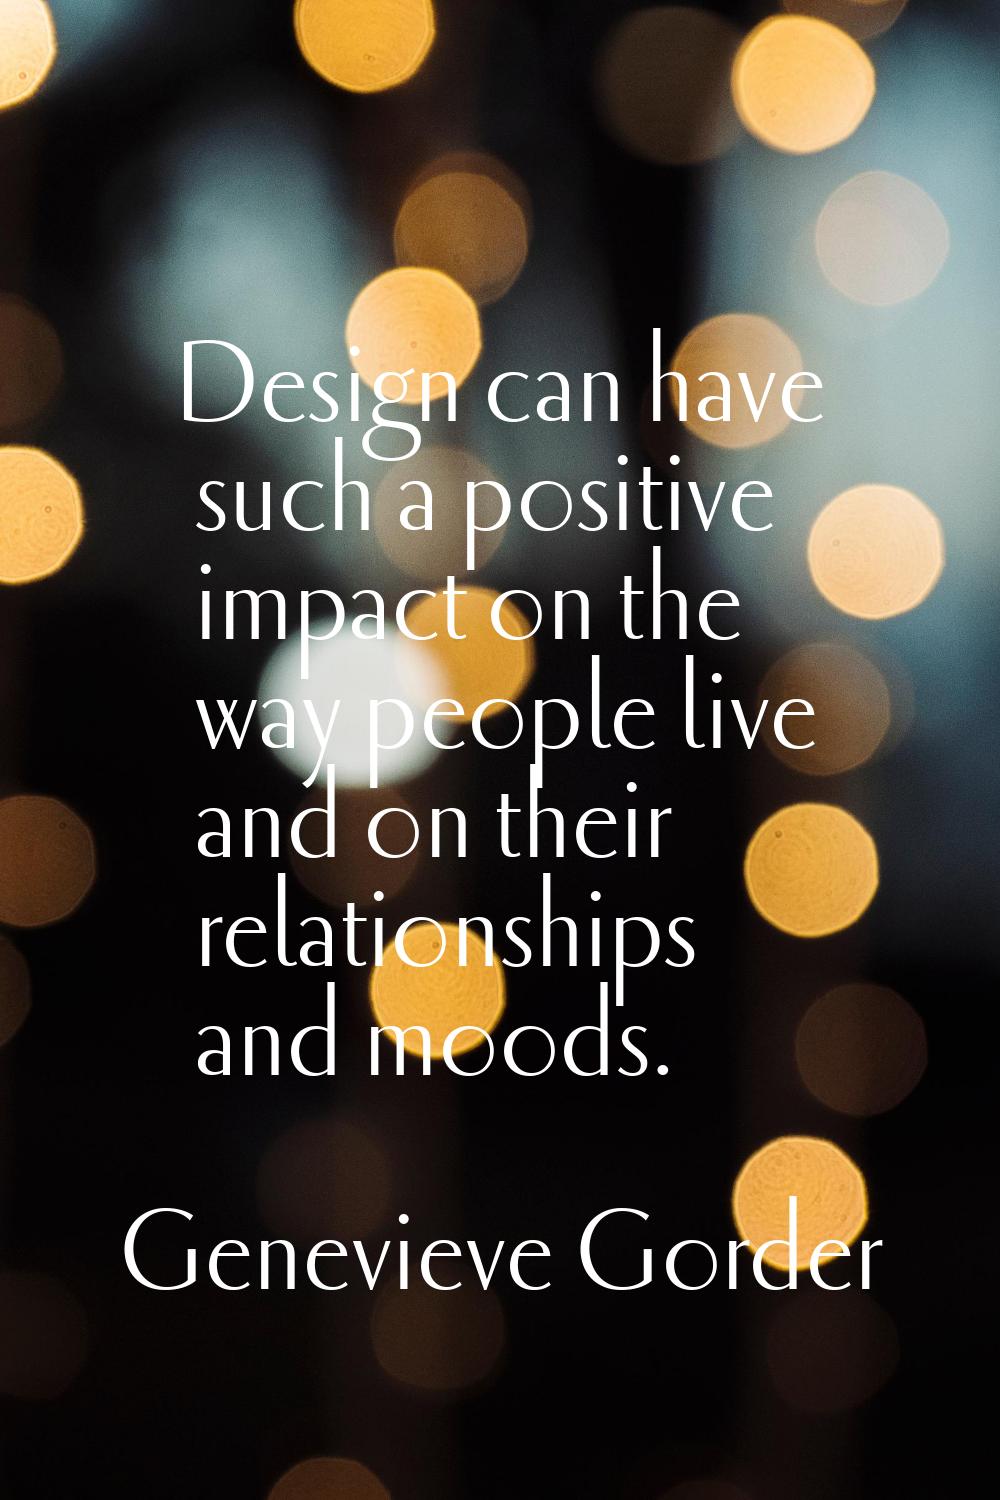 Design can have such a positive impact on the way people live and on their relationships and moods.